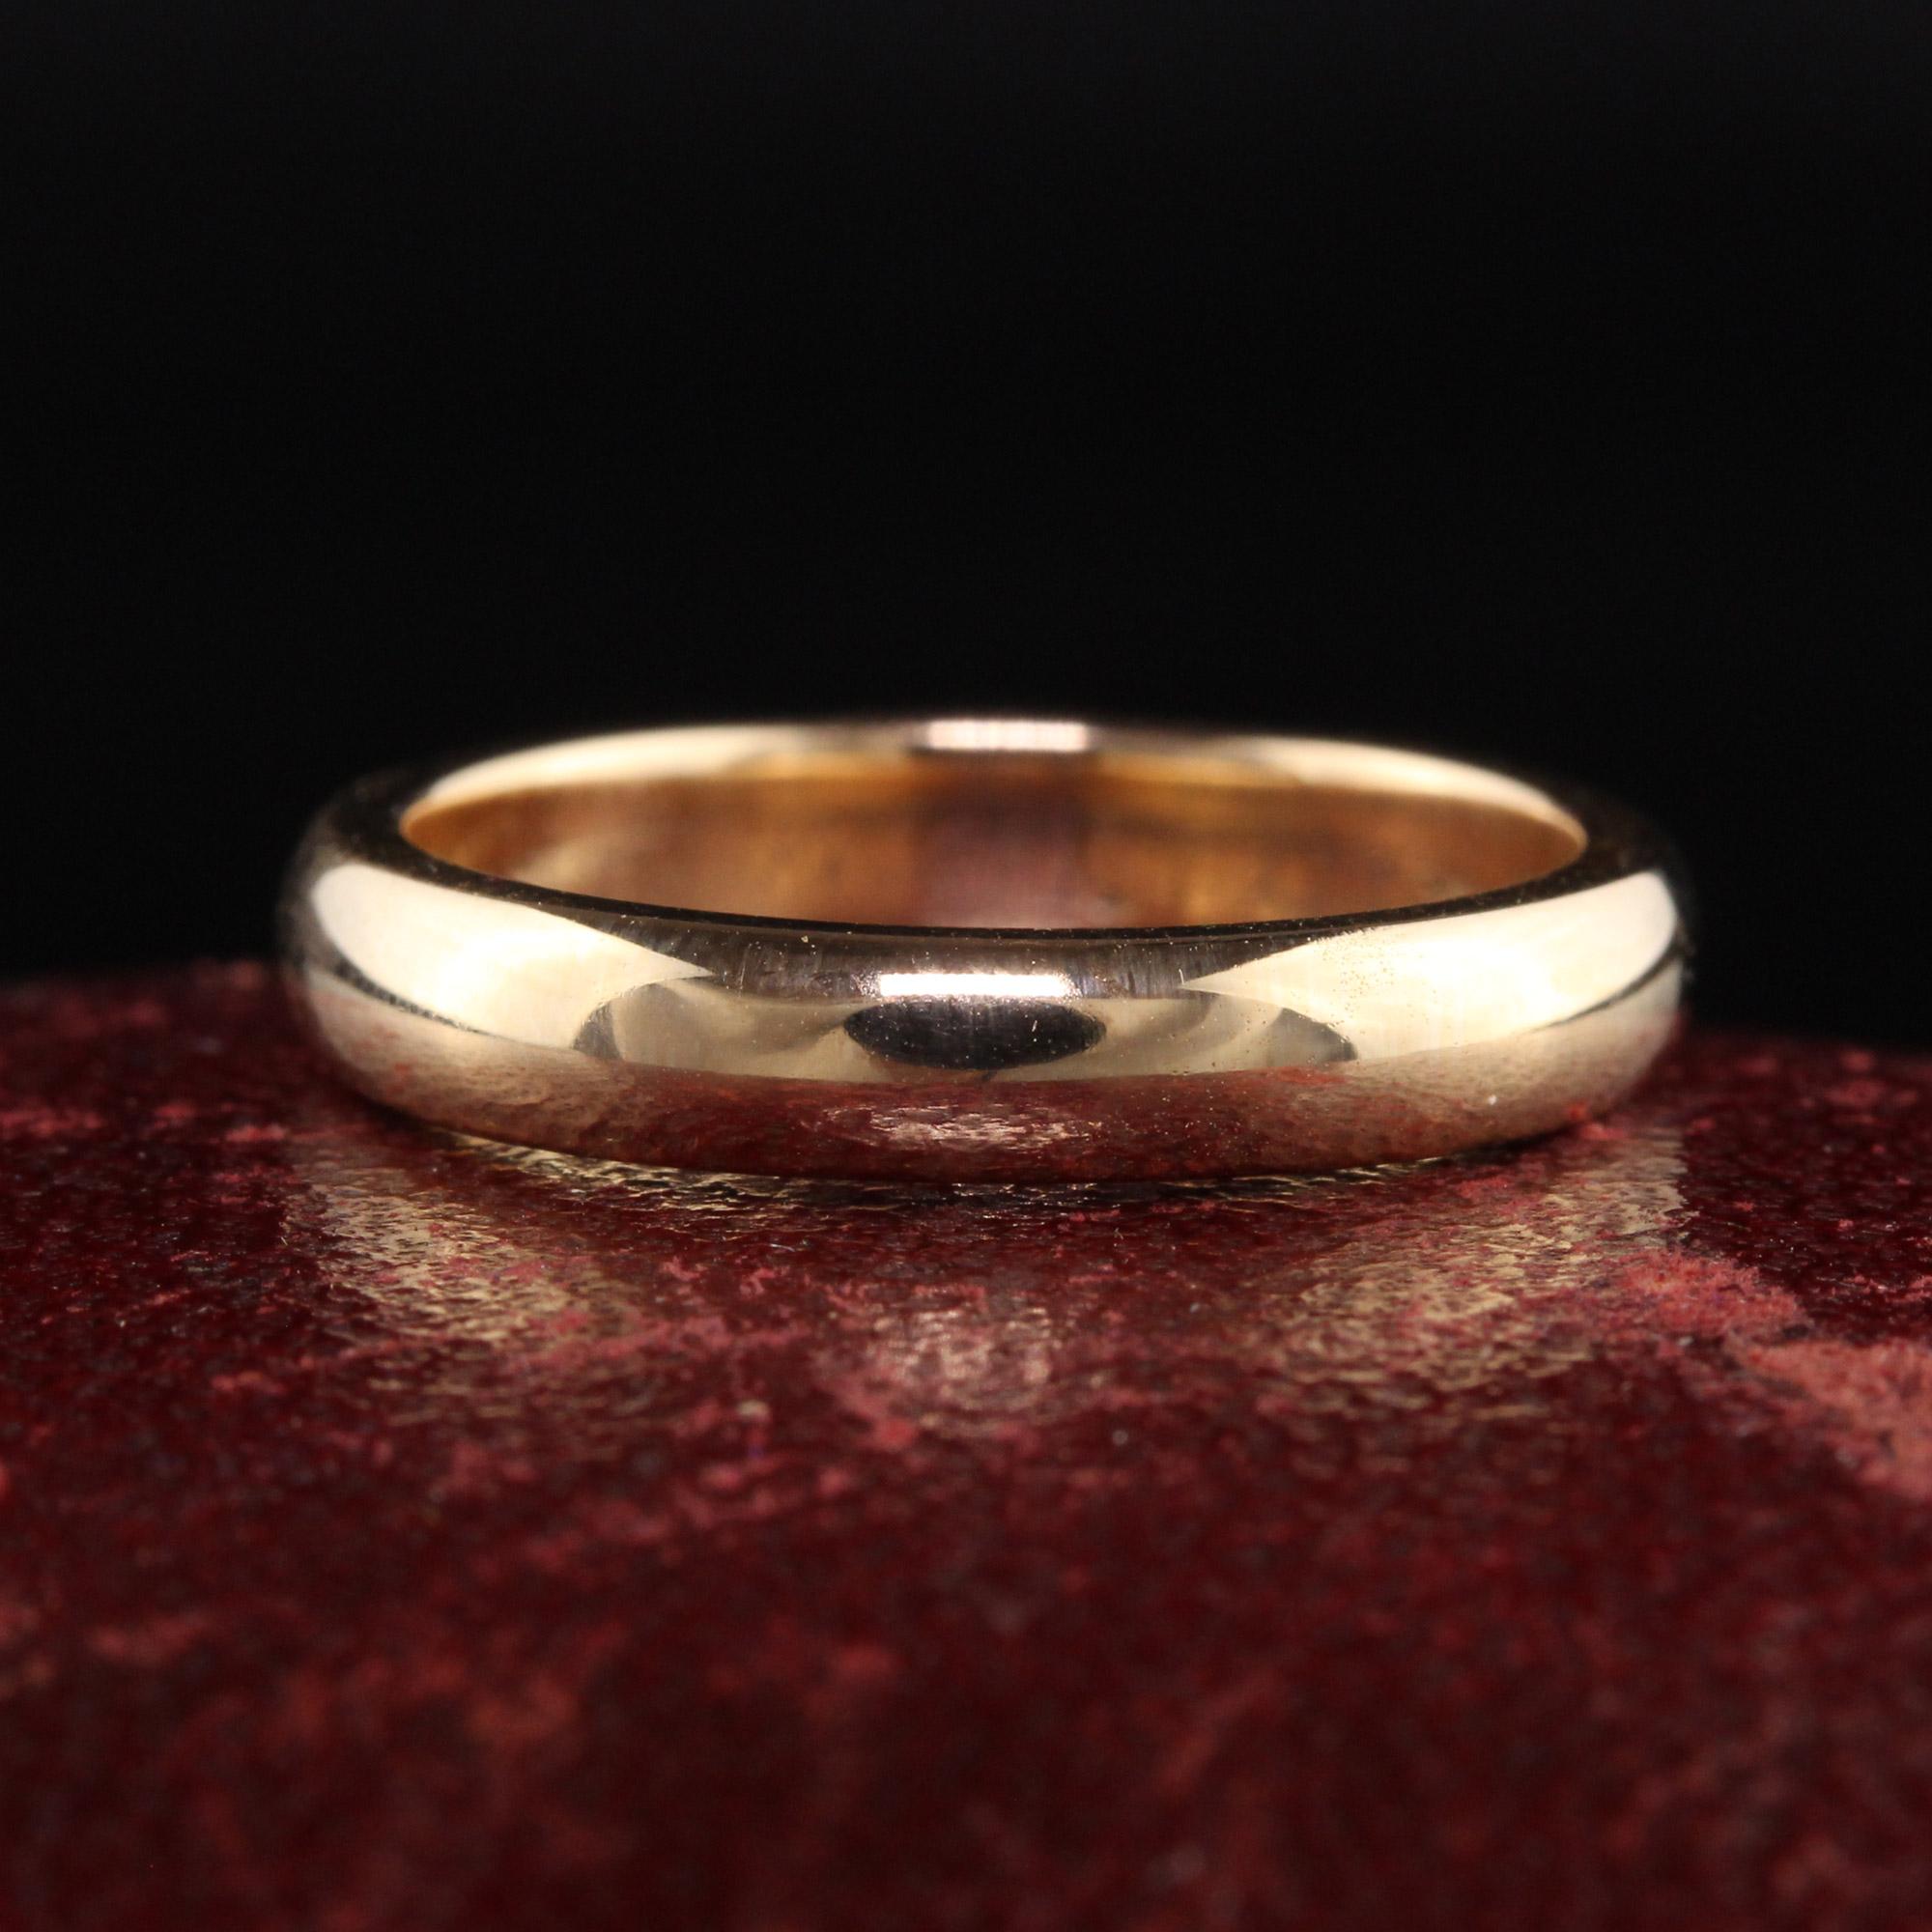 Beautiful Antique Art Deco 18K Yellow Gold Classic Wedding Band - Size 5. This classic wedding band is crafted in 18k yellow gold. This classic band has engravings inside the ring but they are faint and we can make out the words 